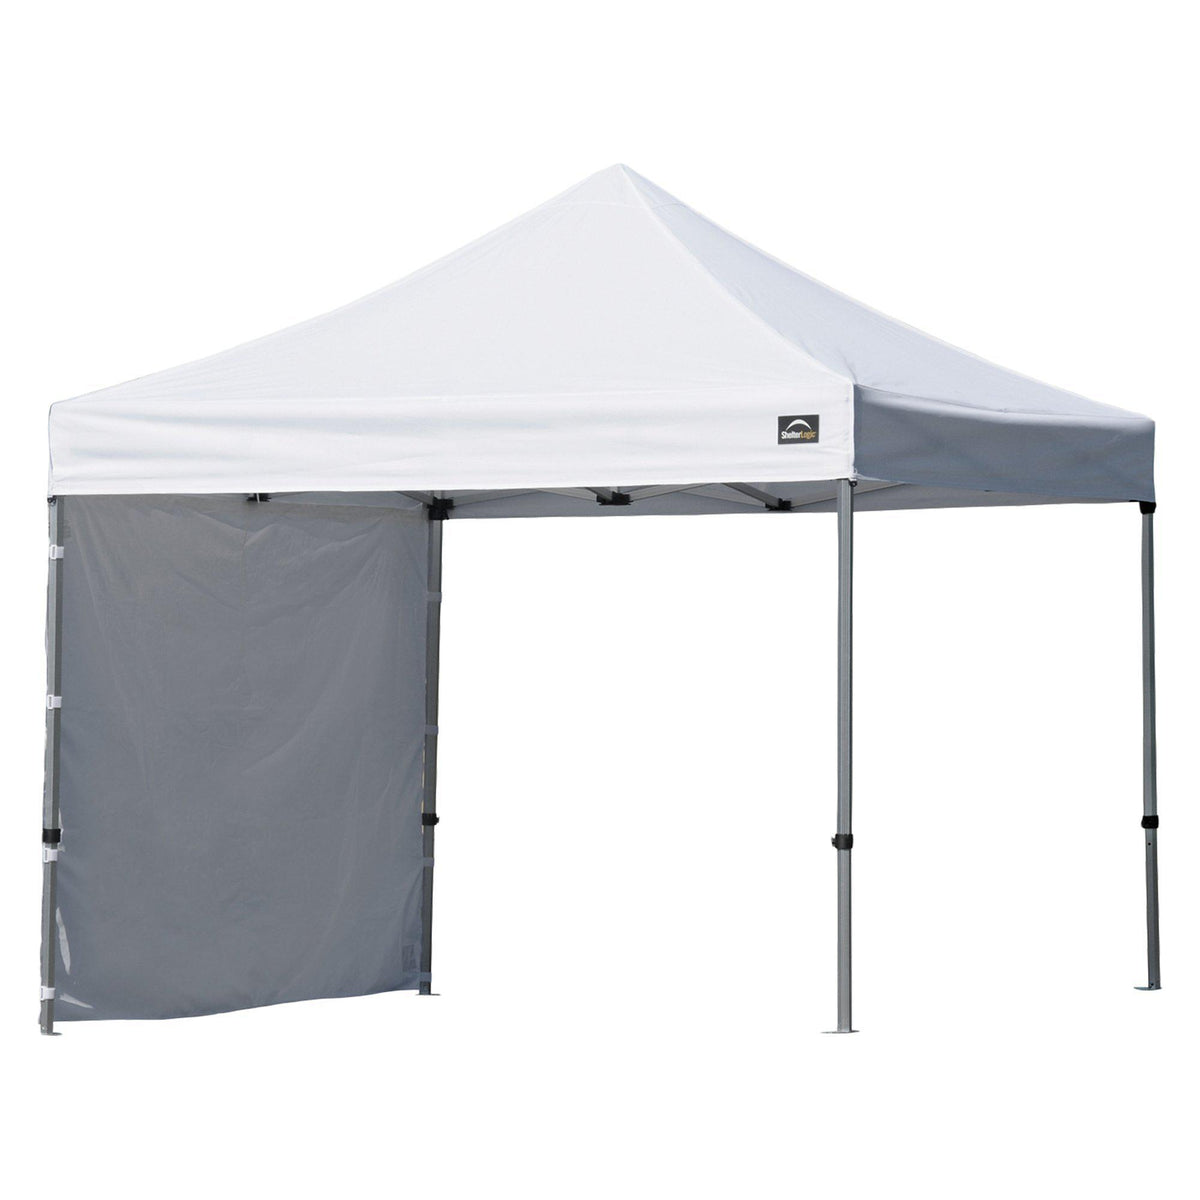 ShelterLogic Alumi-Max Pop-up Canopy Solid One Piece Wall Panel, 10 x 10 ft.